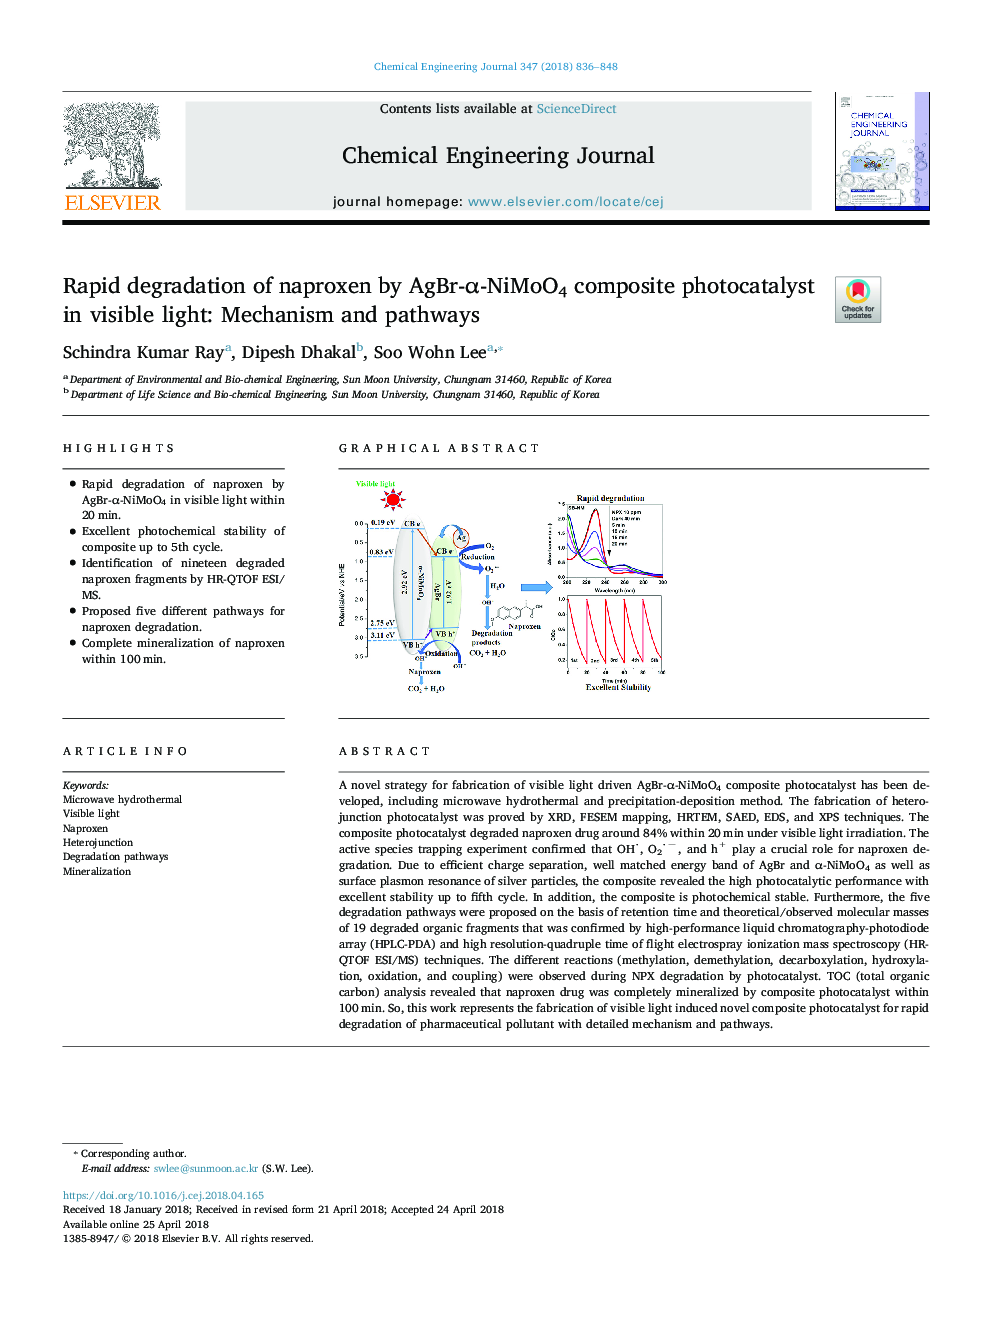 Rapid degradation of naproxen by AgBr-Î±-NiMoO4 composite photocatalyst in visible light: Mechanism and pathways